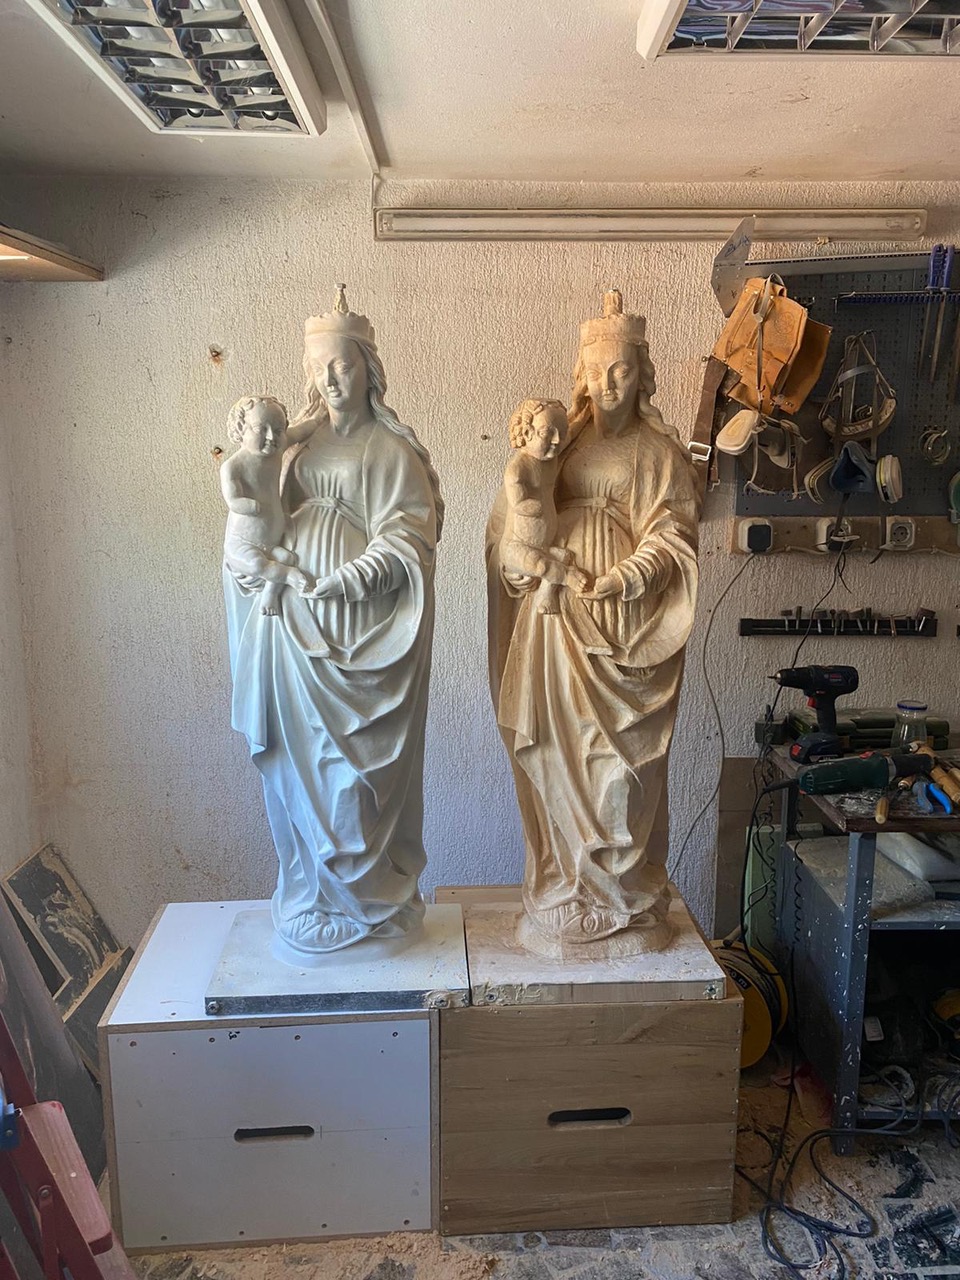 Replication process of a Gothic polychromed wood sculpture of Madonna and Child, which we are doing in memory of a dear friend, Dr Anthea Brook. It is a post-graduate project of a student at the Arts Academy in Zagreb.  Image courtesy of Jadranka  Beresford-Peirse